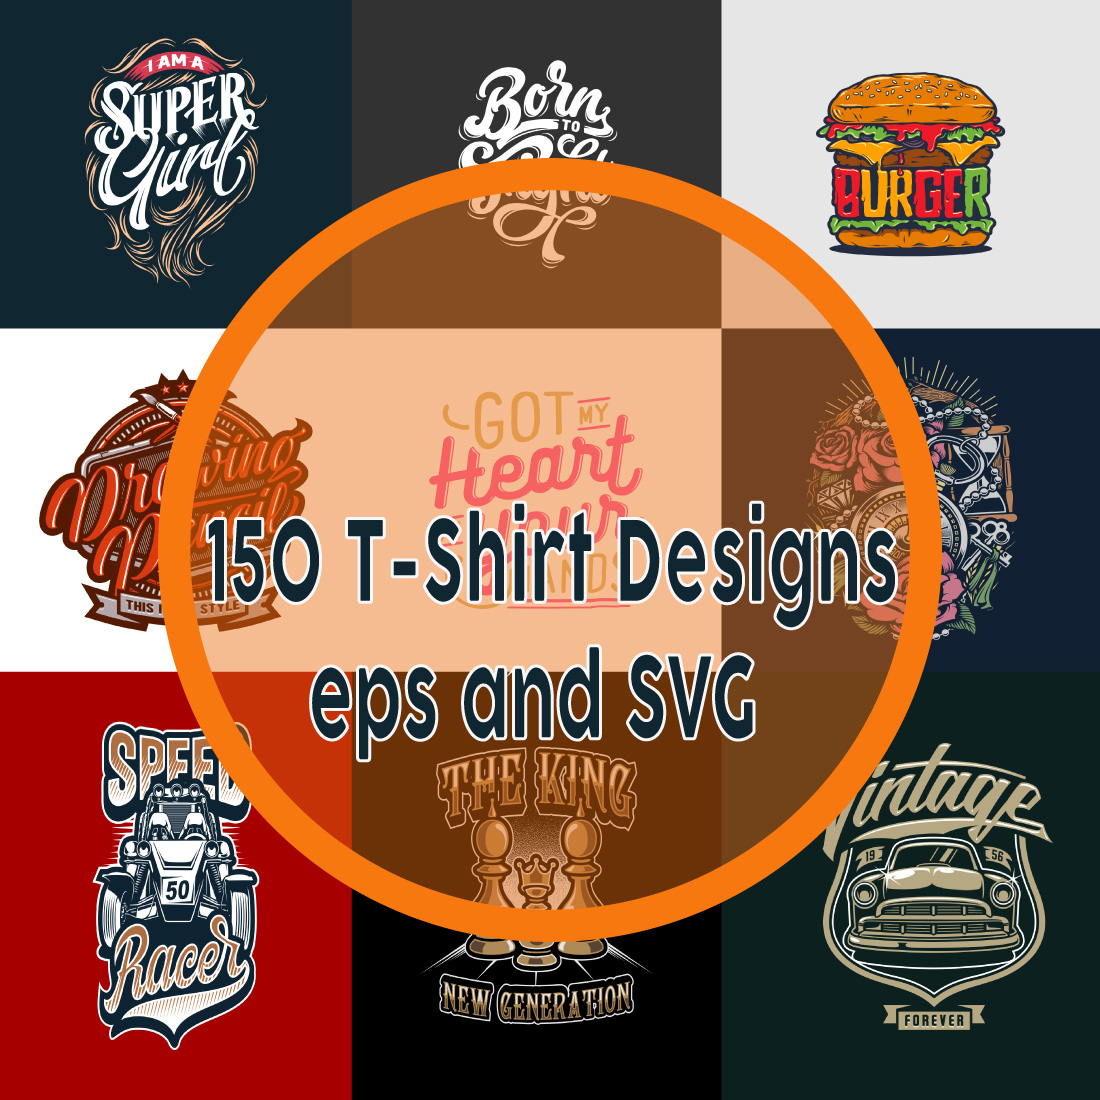 T-Shirt designs eps and SVG preview image.